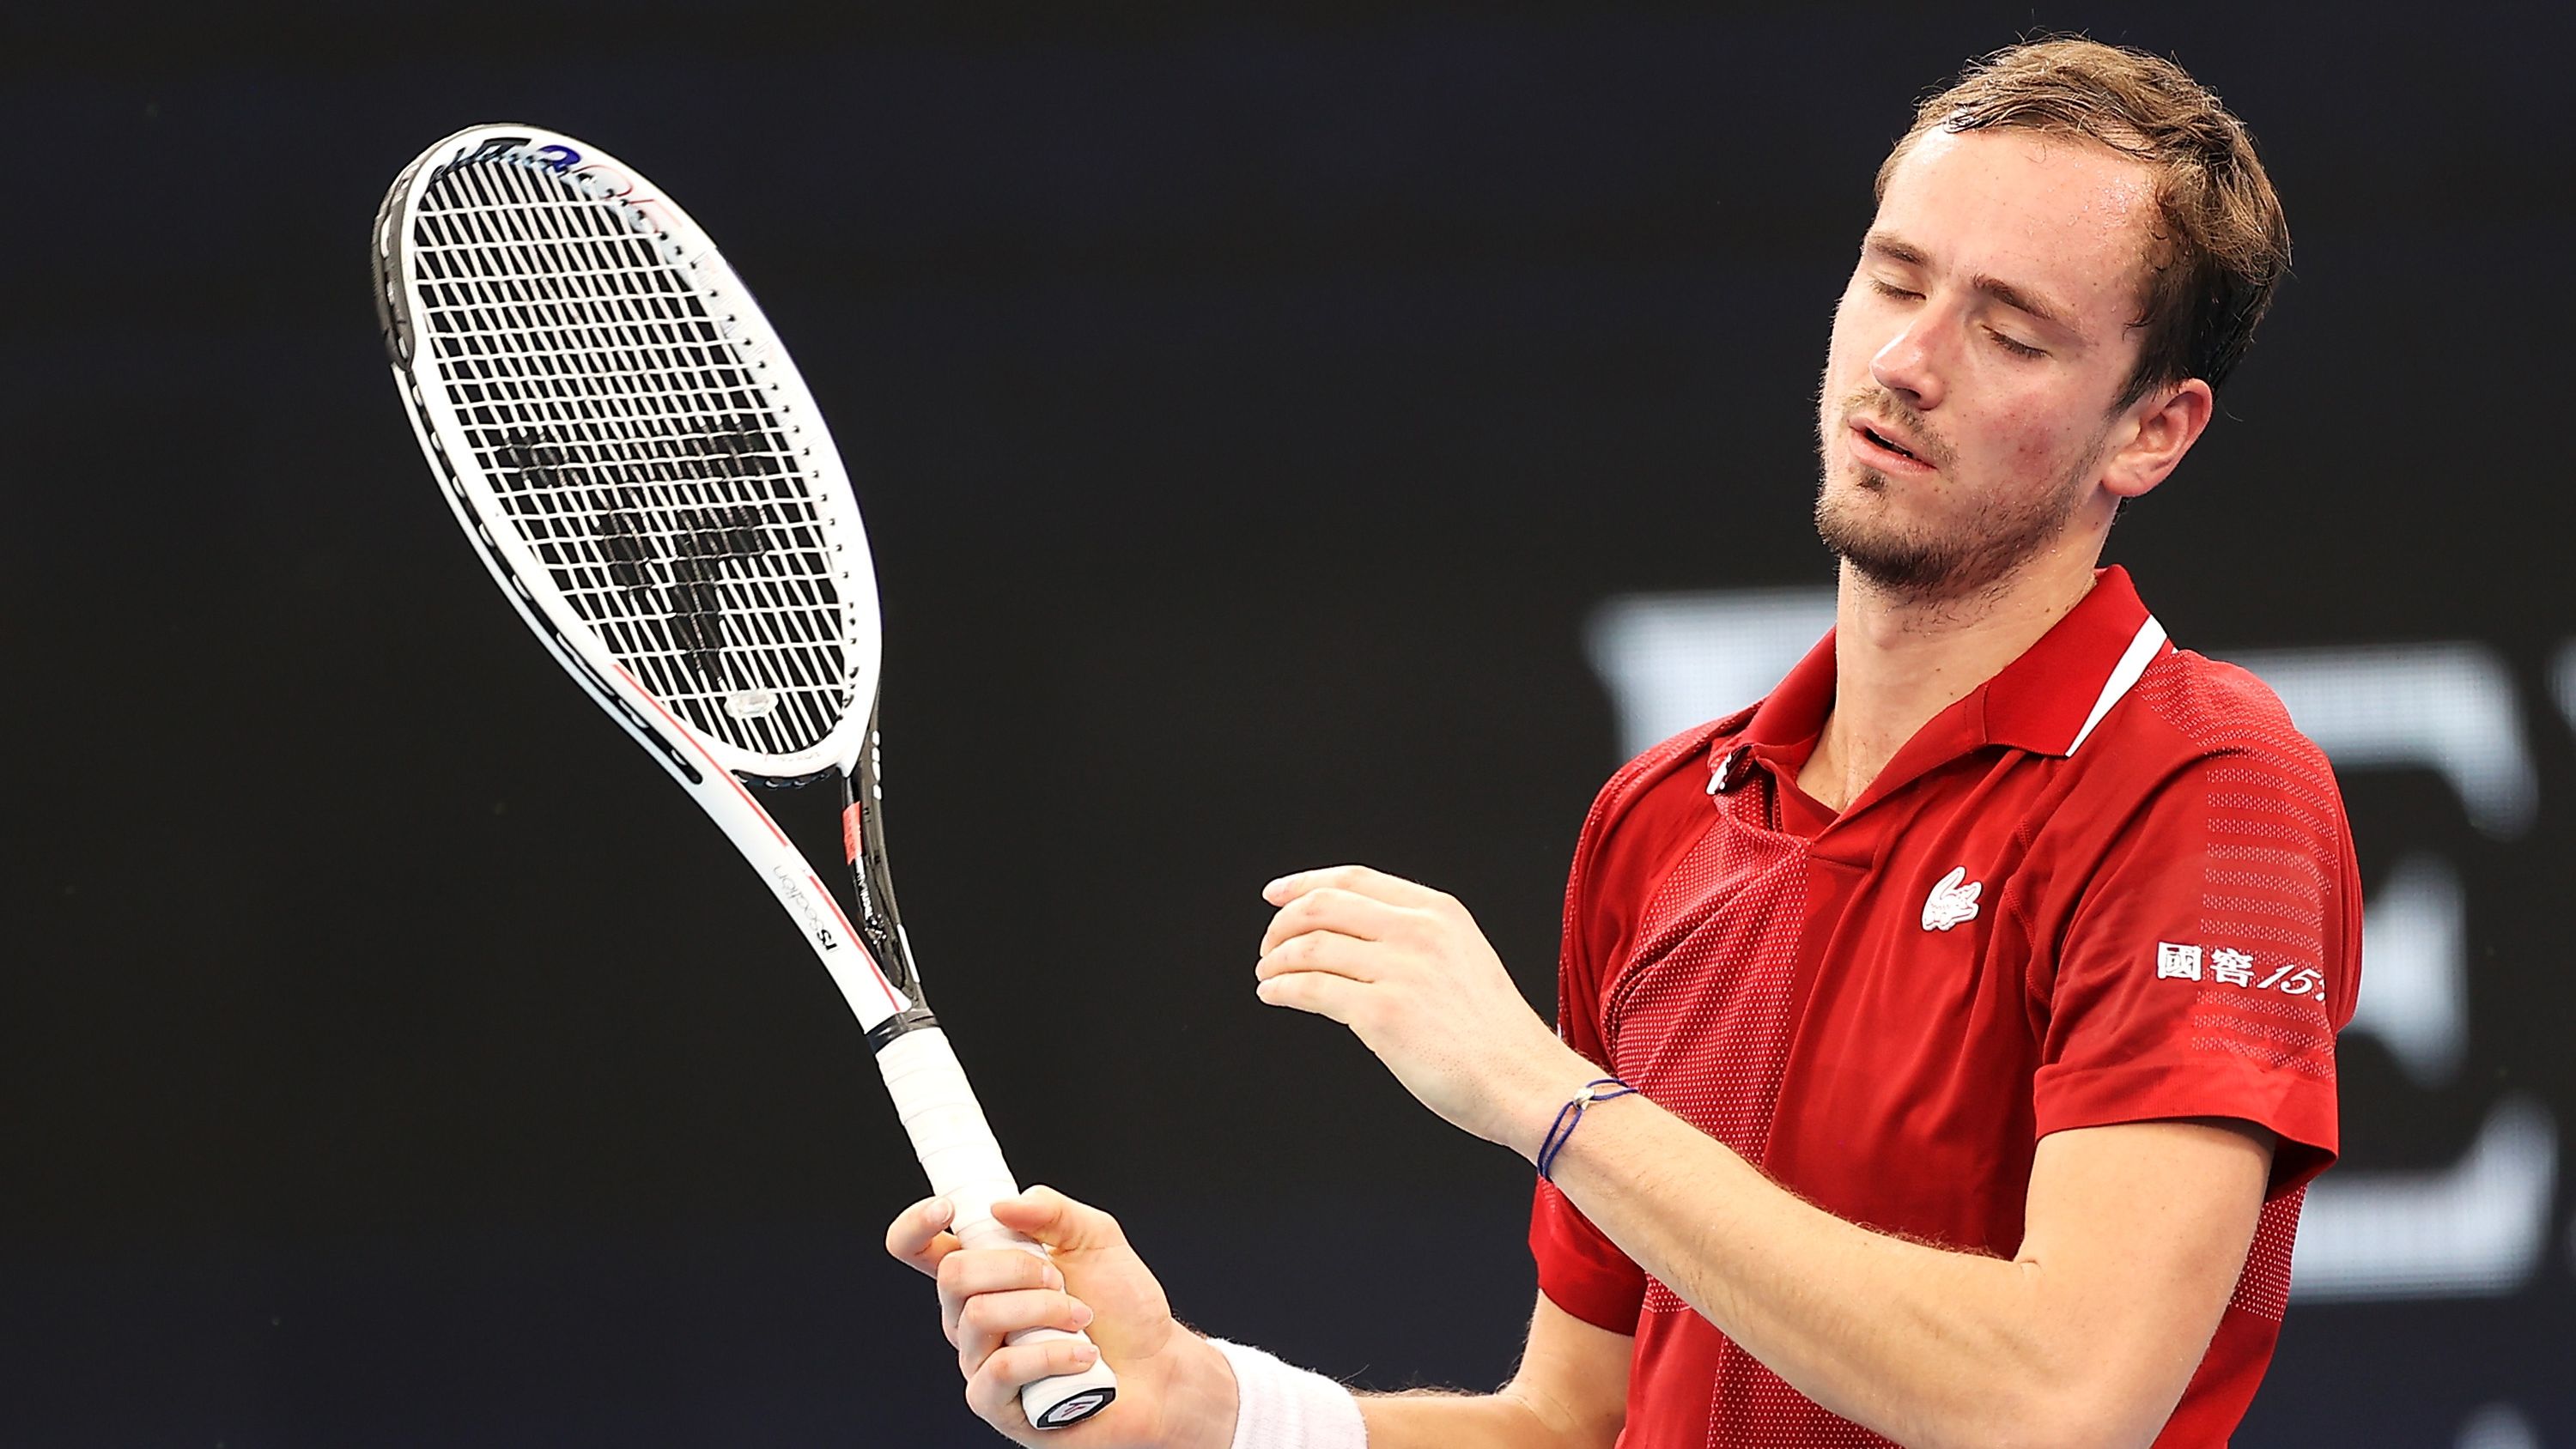 Aus Open favorite upset by Frenchmen in ATP Cup